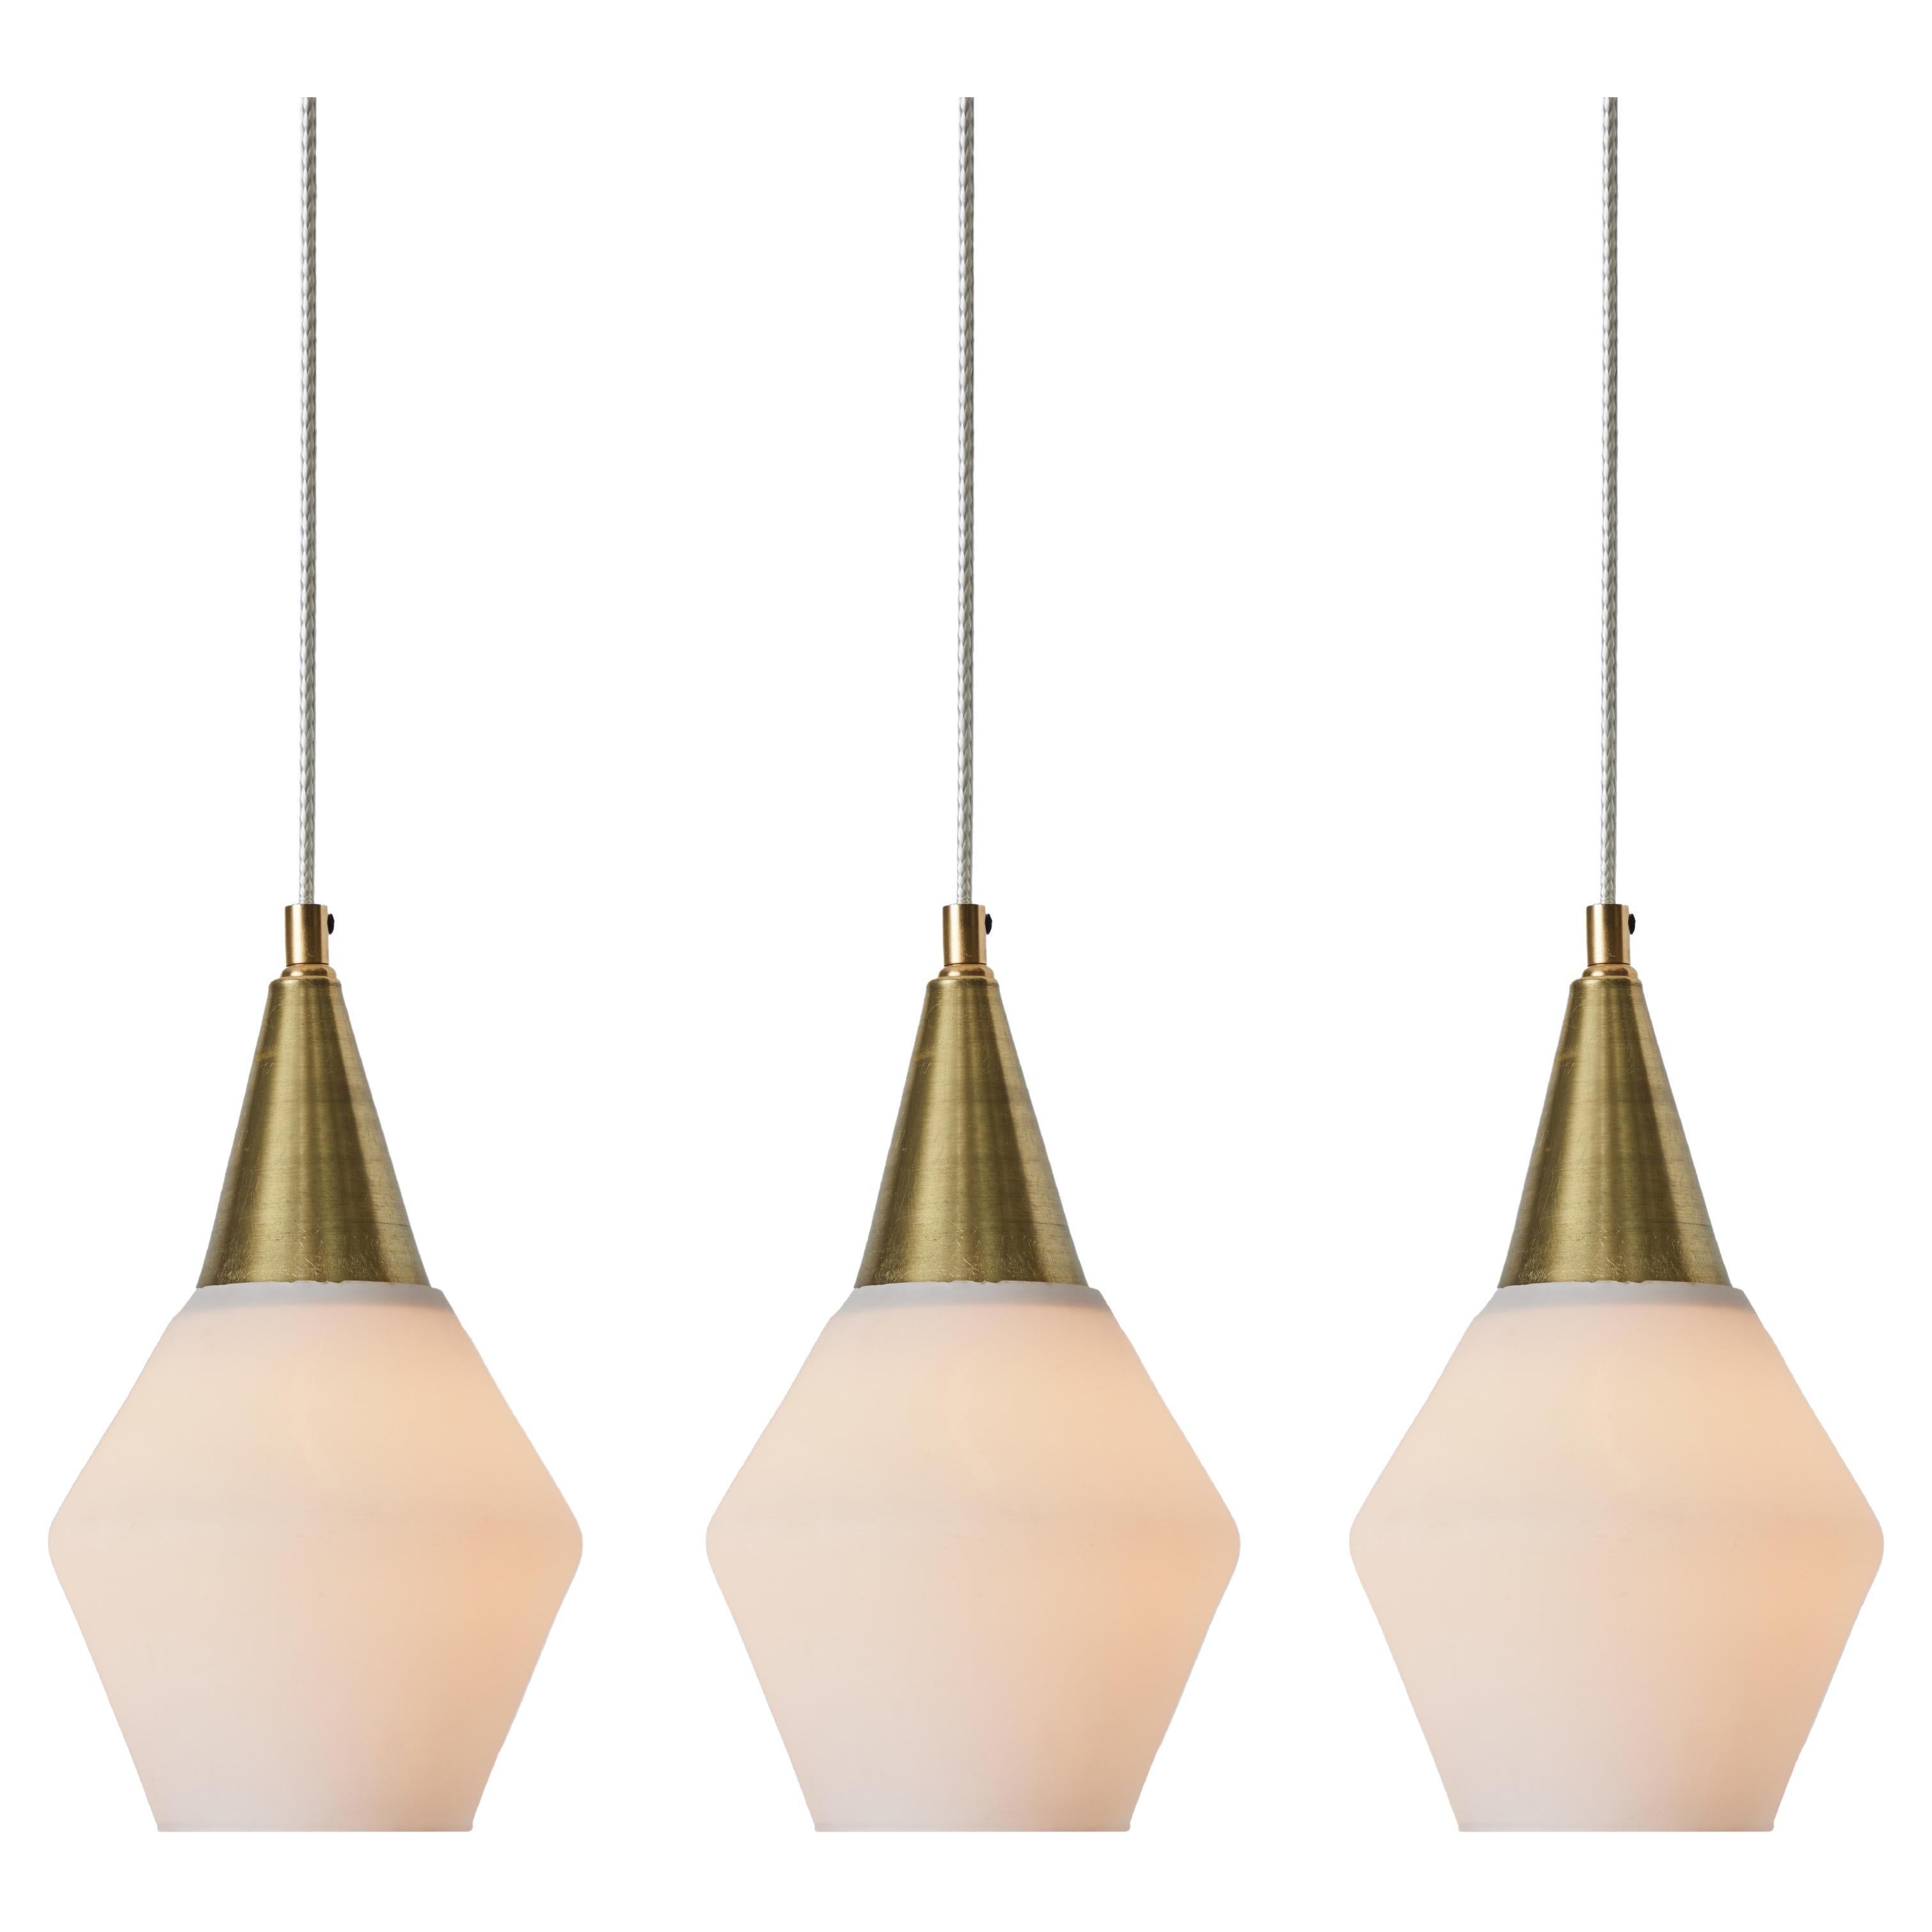 1960s Opaline Glass and Brass Pendant Attributed to Mauri Almari for Idman For Sale